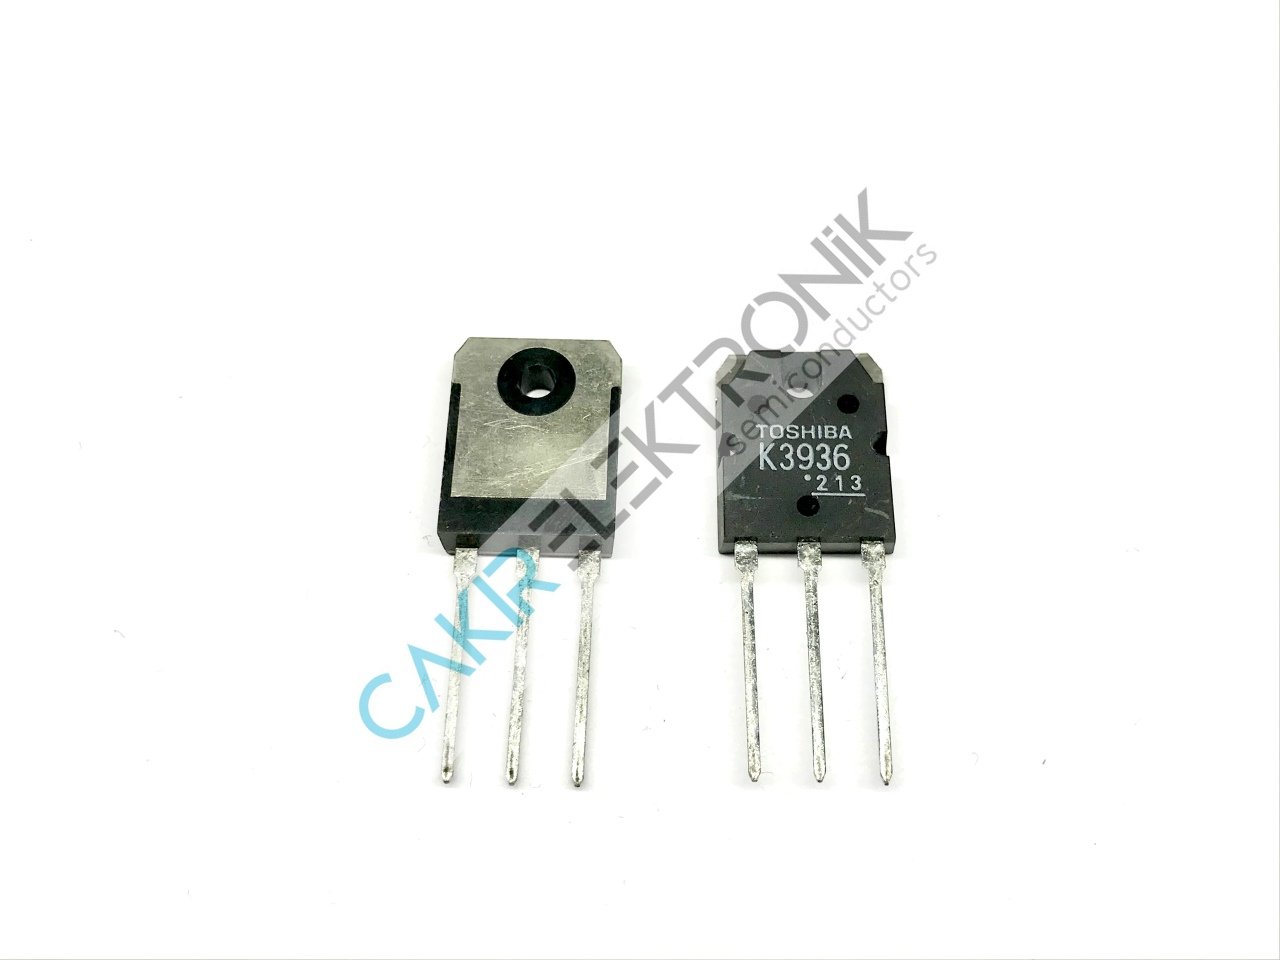 2SK3936  , K3936 ,  23A 500V 0.2R TO-3P THT N-Kanal Mosfet